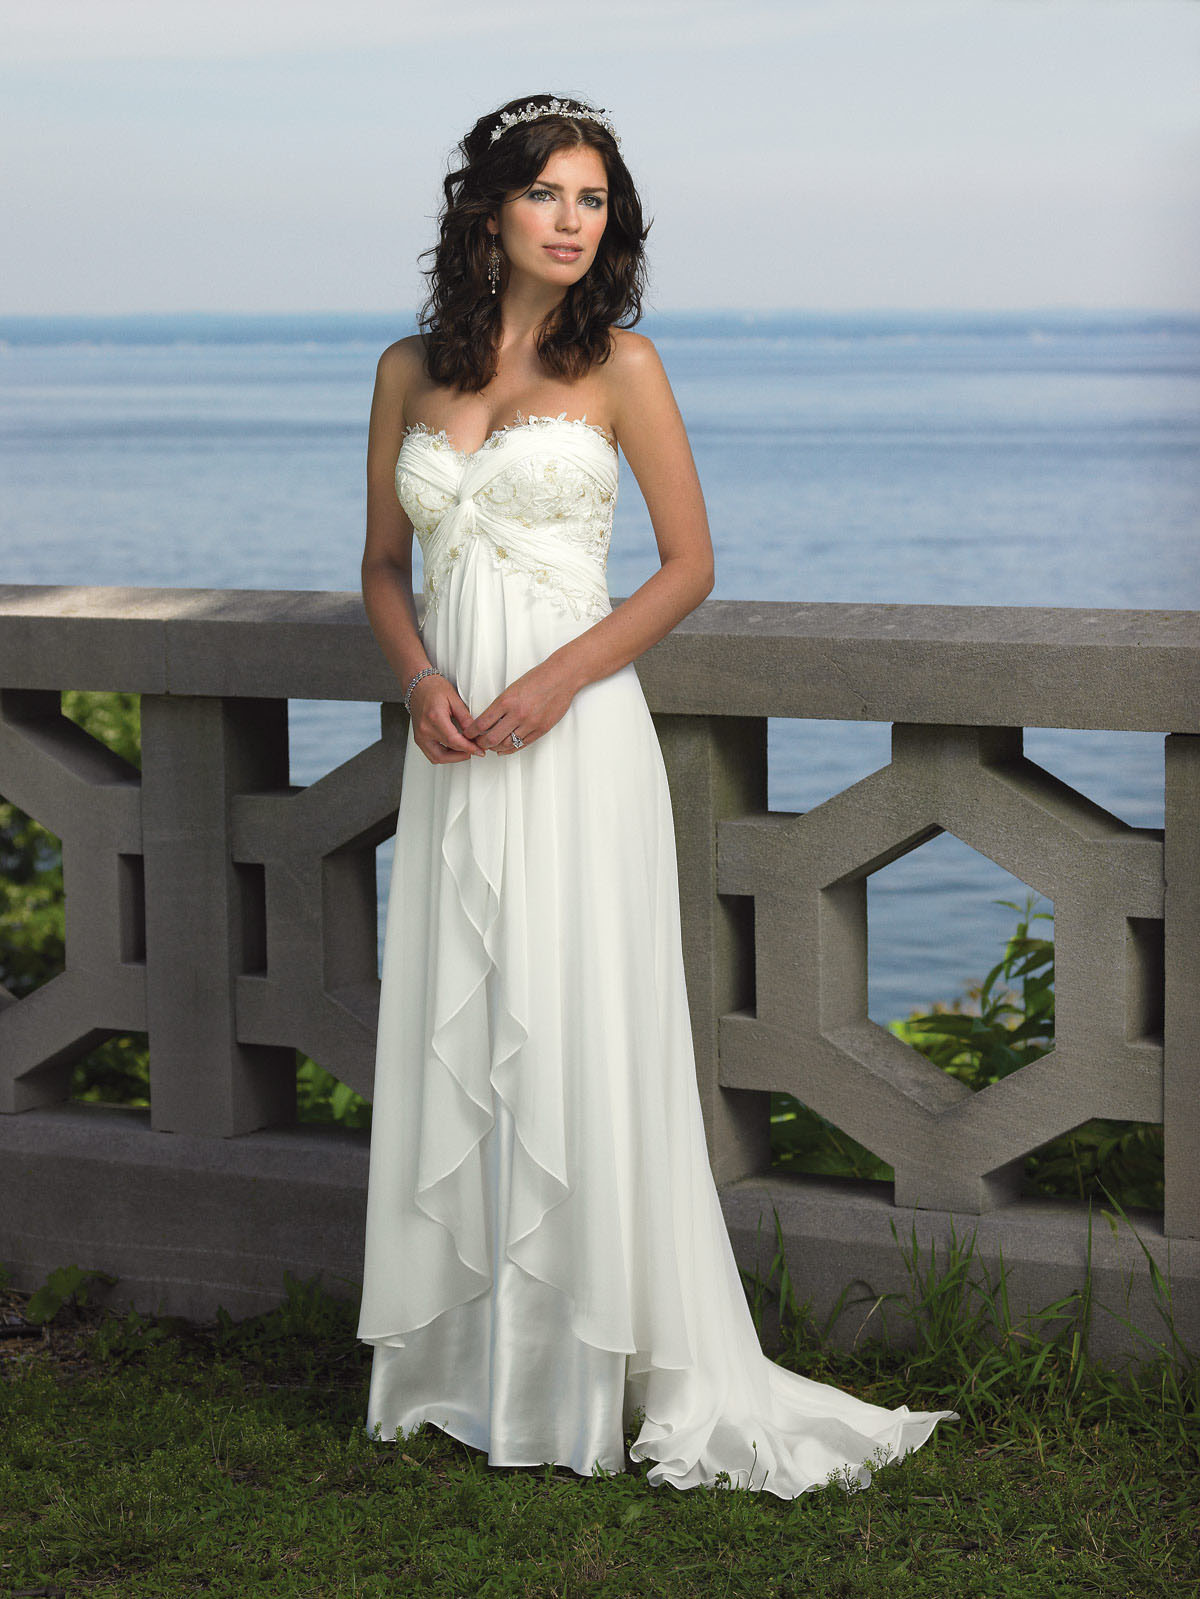 Beach Wedding Outfits
 Top 10 perfect beach wedding dresses of 2014